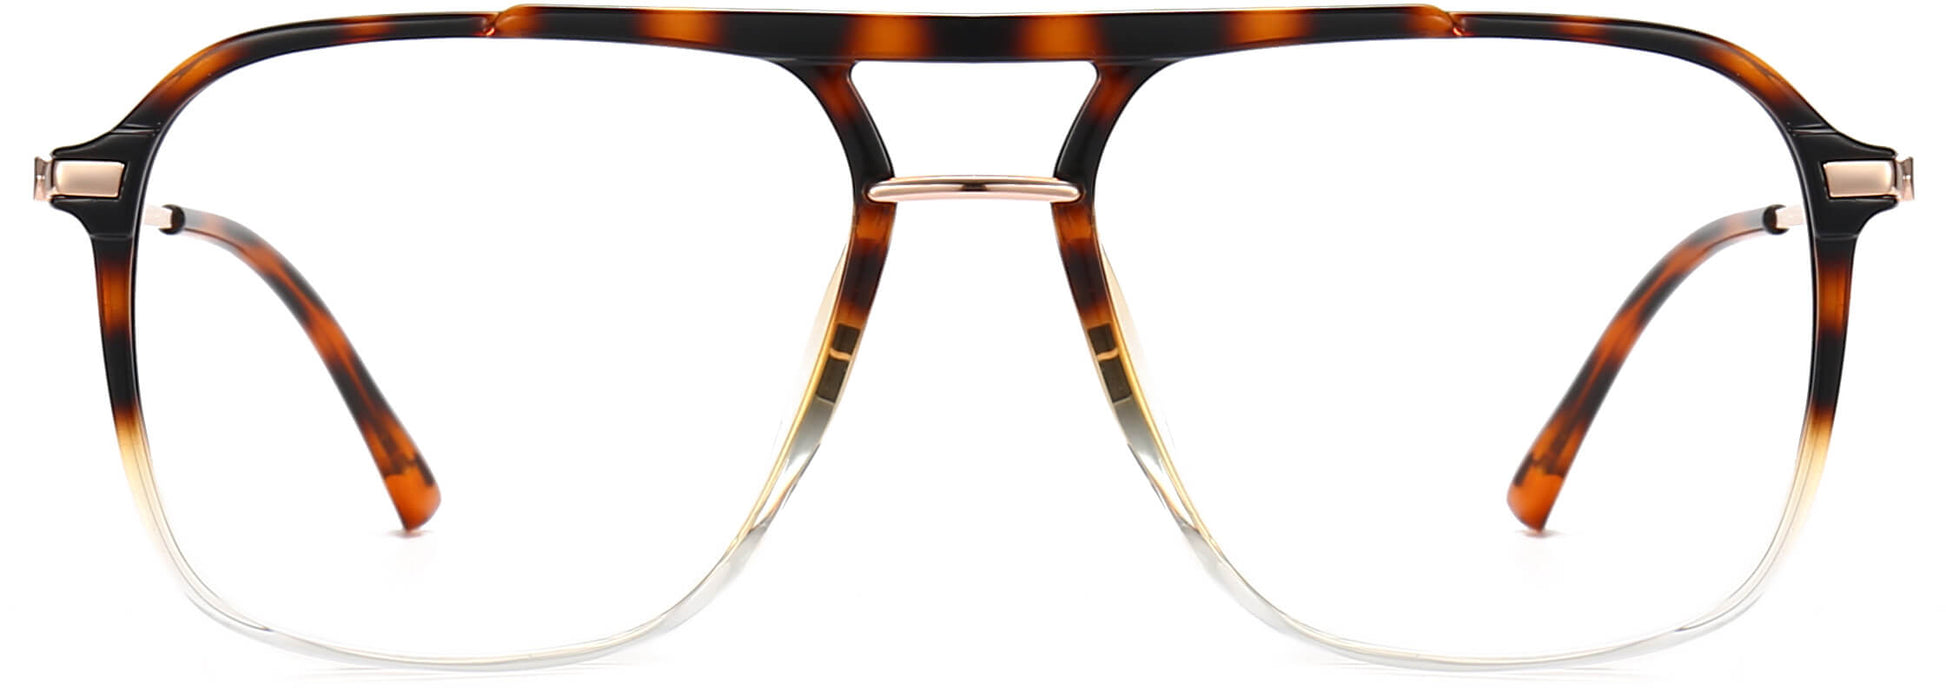 Langston Square Tortoise Eyeglasses from ANRRI, front view